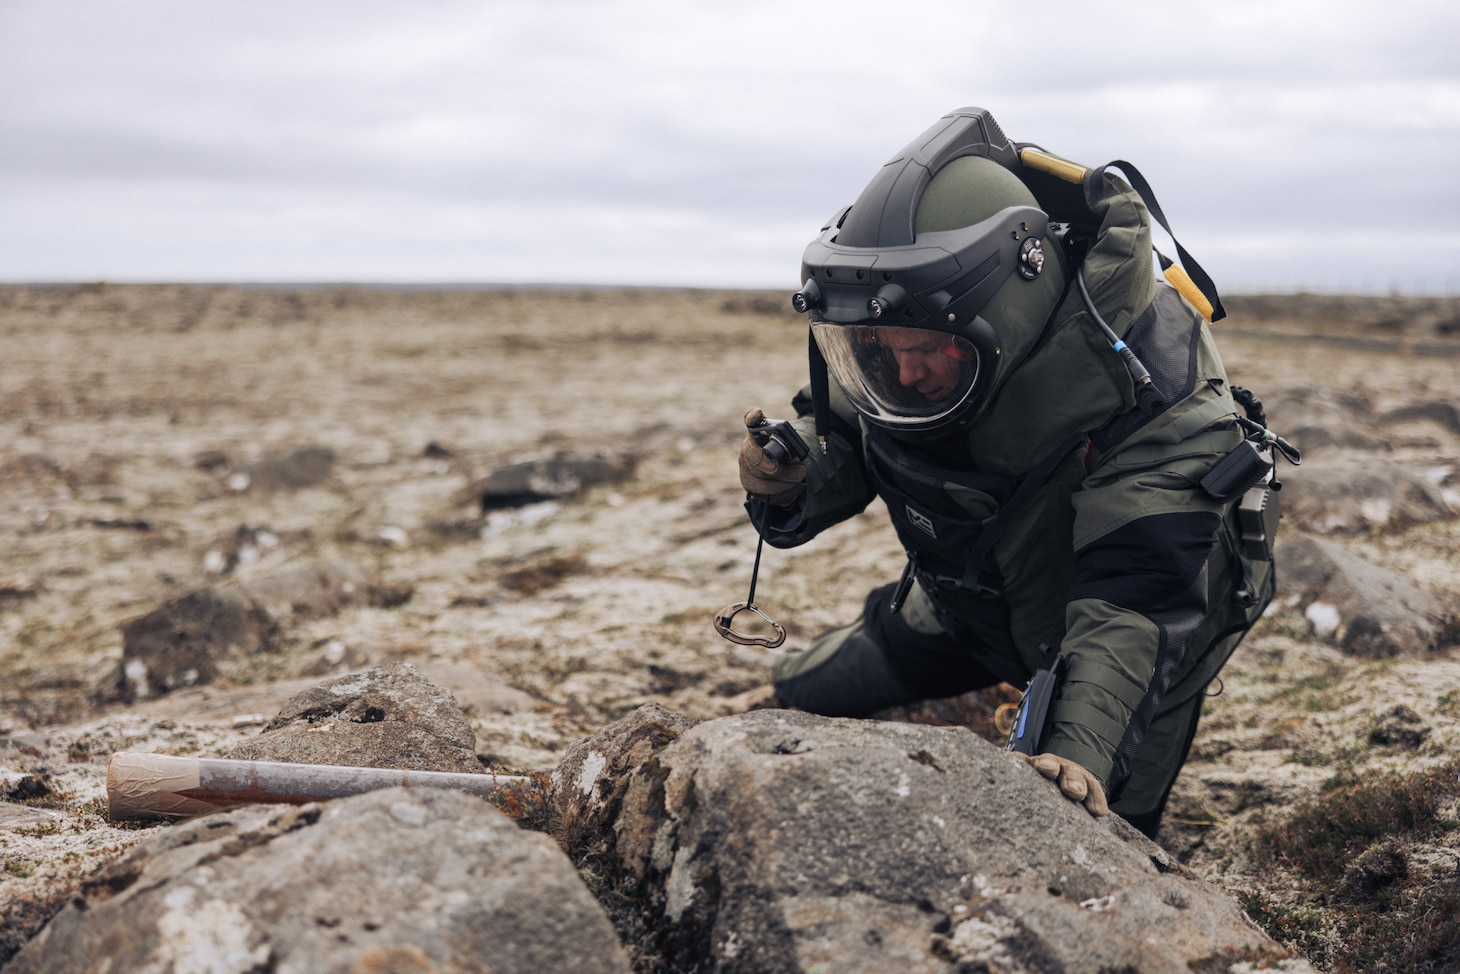 U.S. Marine Corps Staff Sgt. Mark Frick, a native of Baltimore, Maryland and explosive ordnance disposal team leader with the 26th Marine Expeditionary Unit (Special Operations Capable) (26MEU(SOC)), photographs a neutralized simulated improvised explosive device during Exercise Northern Challenge 2023, Keflavik Airport, Iceland, Sept. 22, 2023. Northern Challenge 23 is an Icelandic Coast Guard-led bomb disposal exercise, hosted to train teams from over a dozen nations with response to incidents involving simulated improvised and military explosive devices. The San Antonio-class amphibious transport dock ship USS Mesa Verde (LPD 19), assigned to the Bataan Amphibious Ready Group and embarked 26MEU(SOC), under the command and control of Task Force 61/2, is on a scheduled deployment in the U.S. Naval Forces Europe area of operations, employed by U.S. Sixth Fleet to defend U.S., Allied, and partner interests. (U.S. Marine Corps photo by Cpl. Kyle Jia)